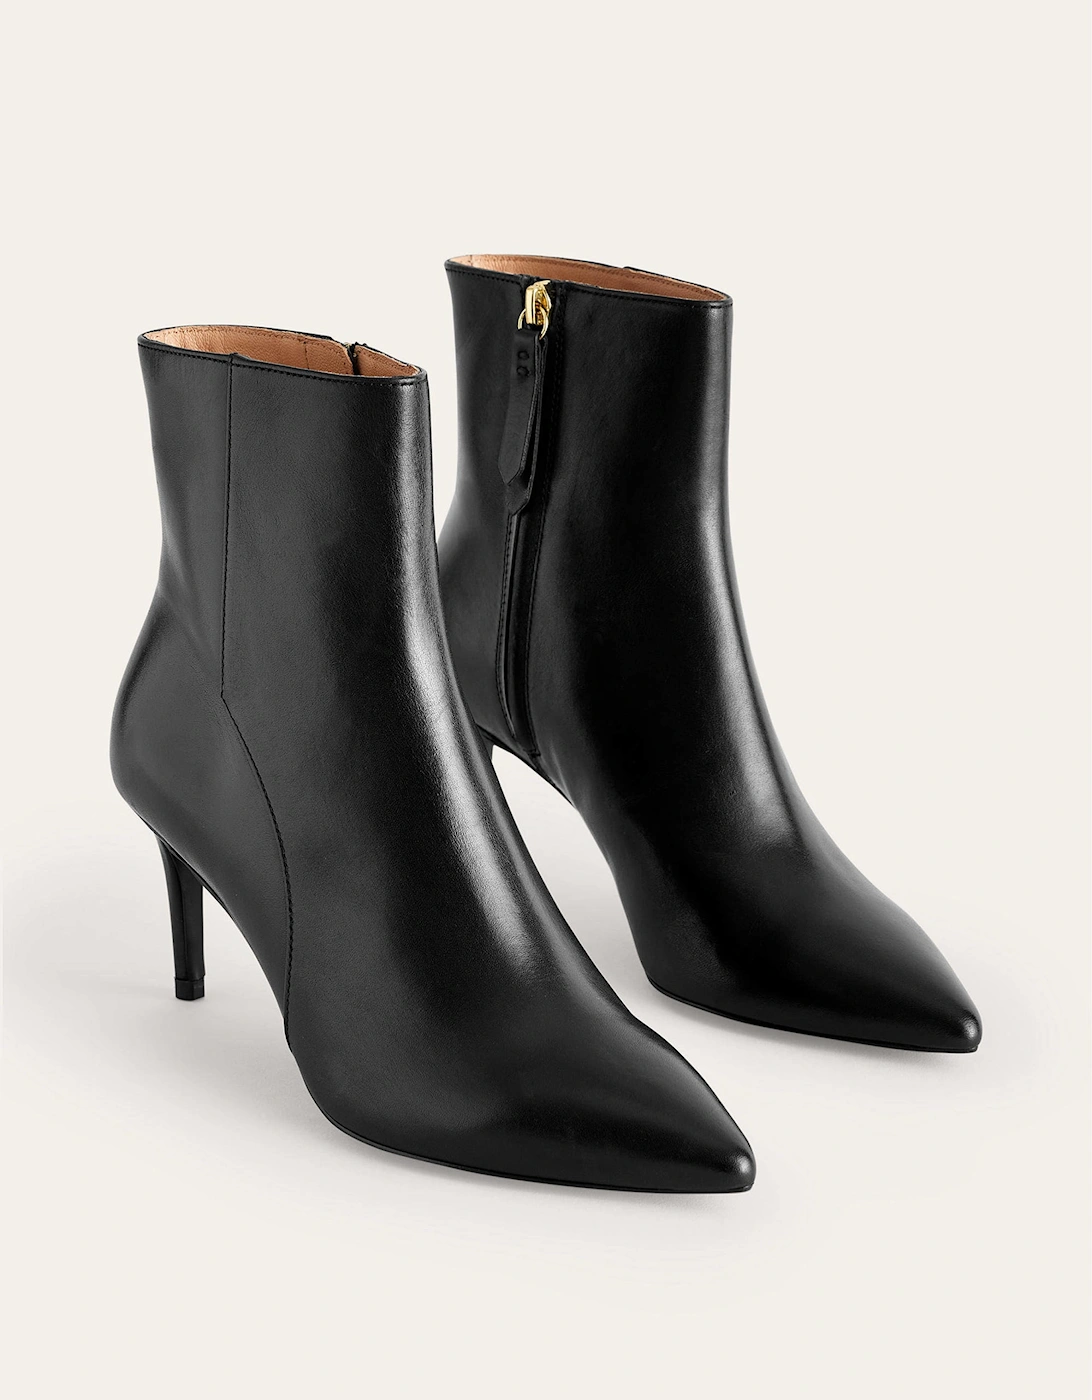 Pointed-Toe Ankle Boots